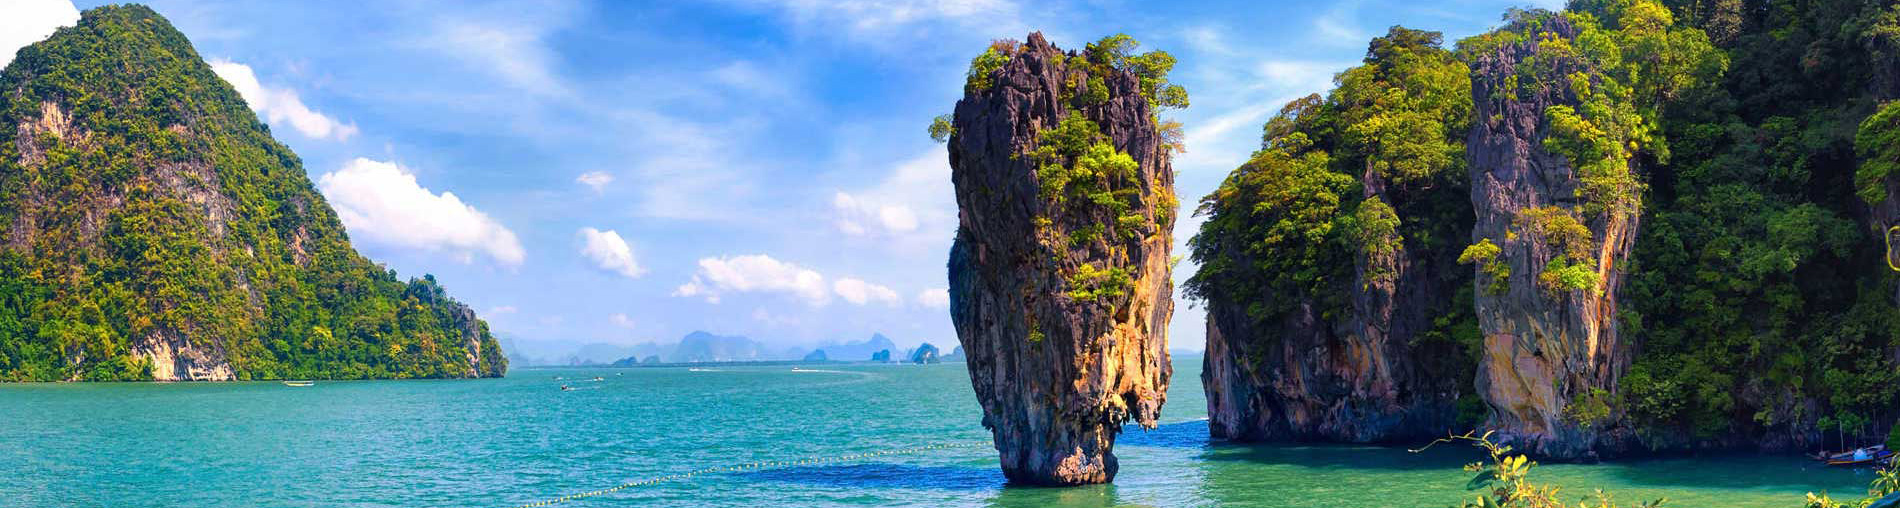 Most Popular Thailand Tour Packages